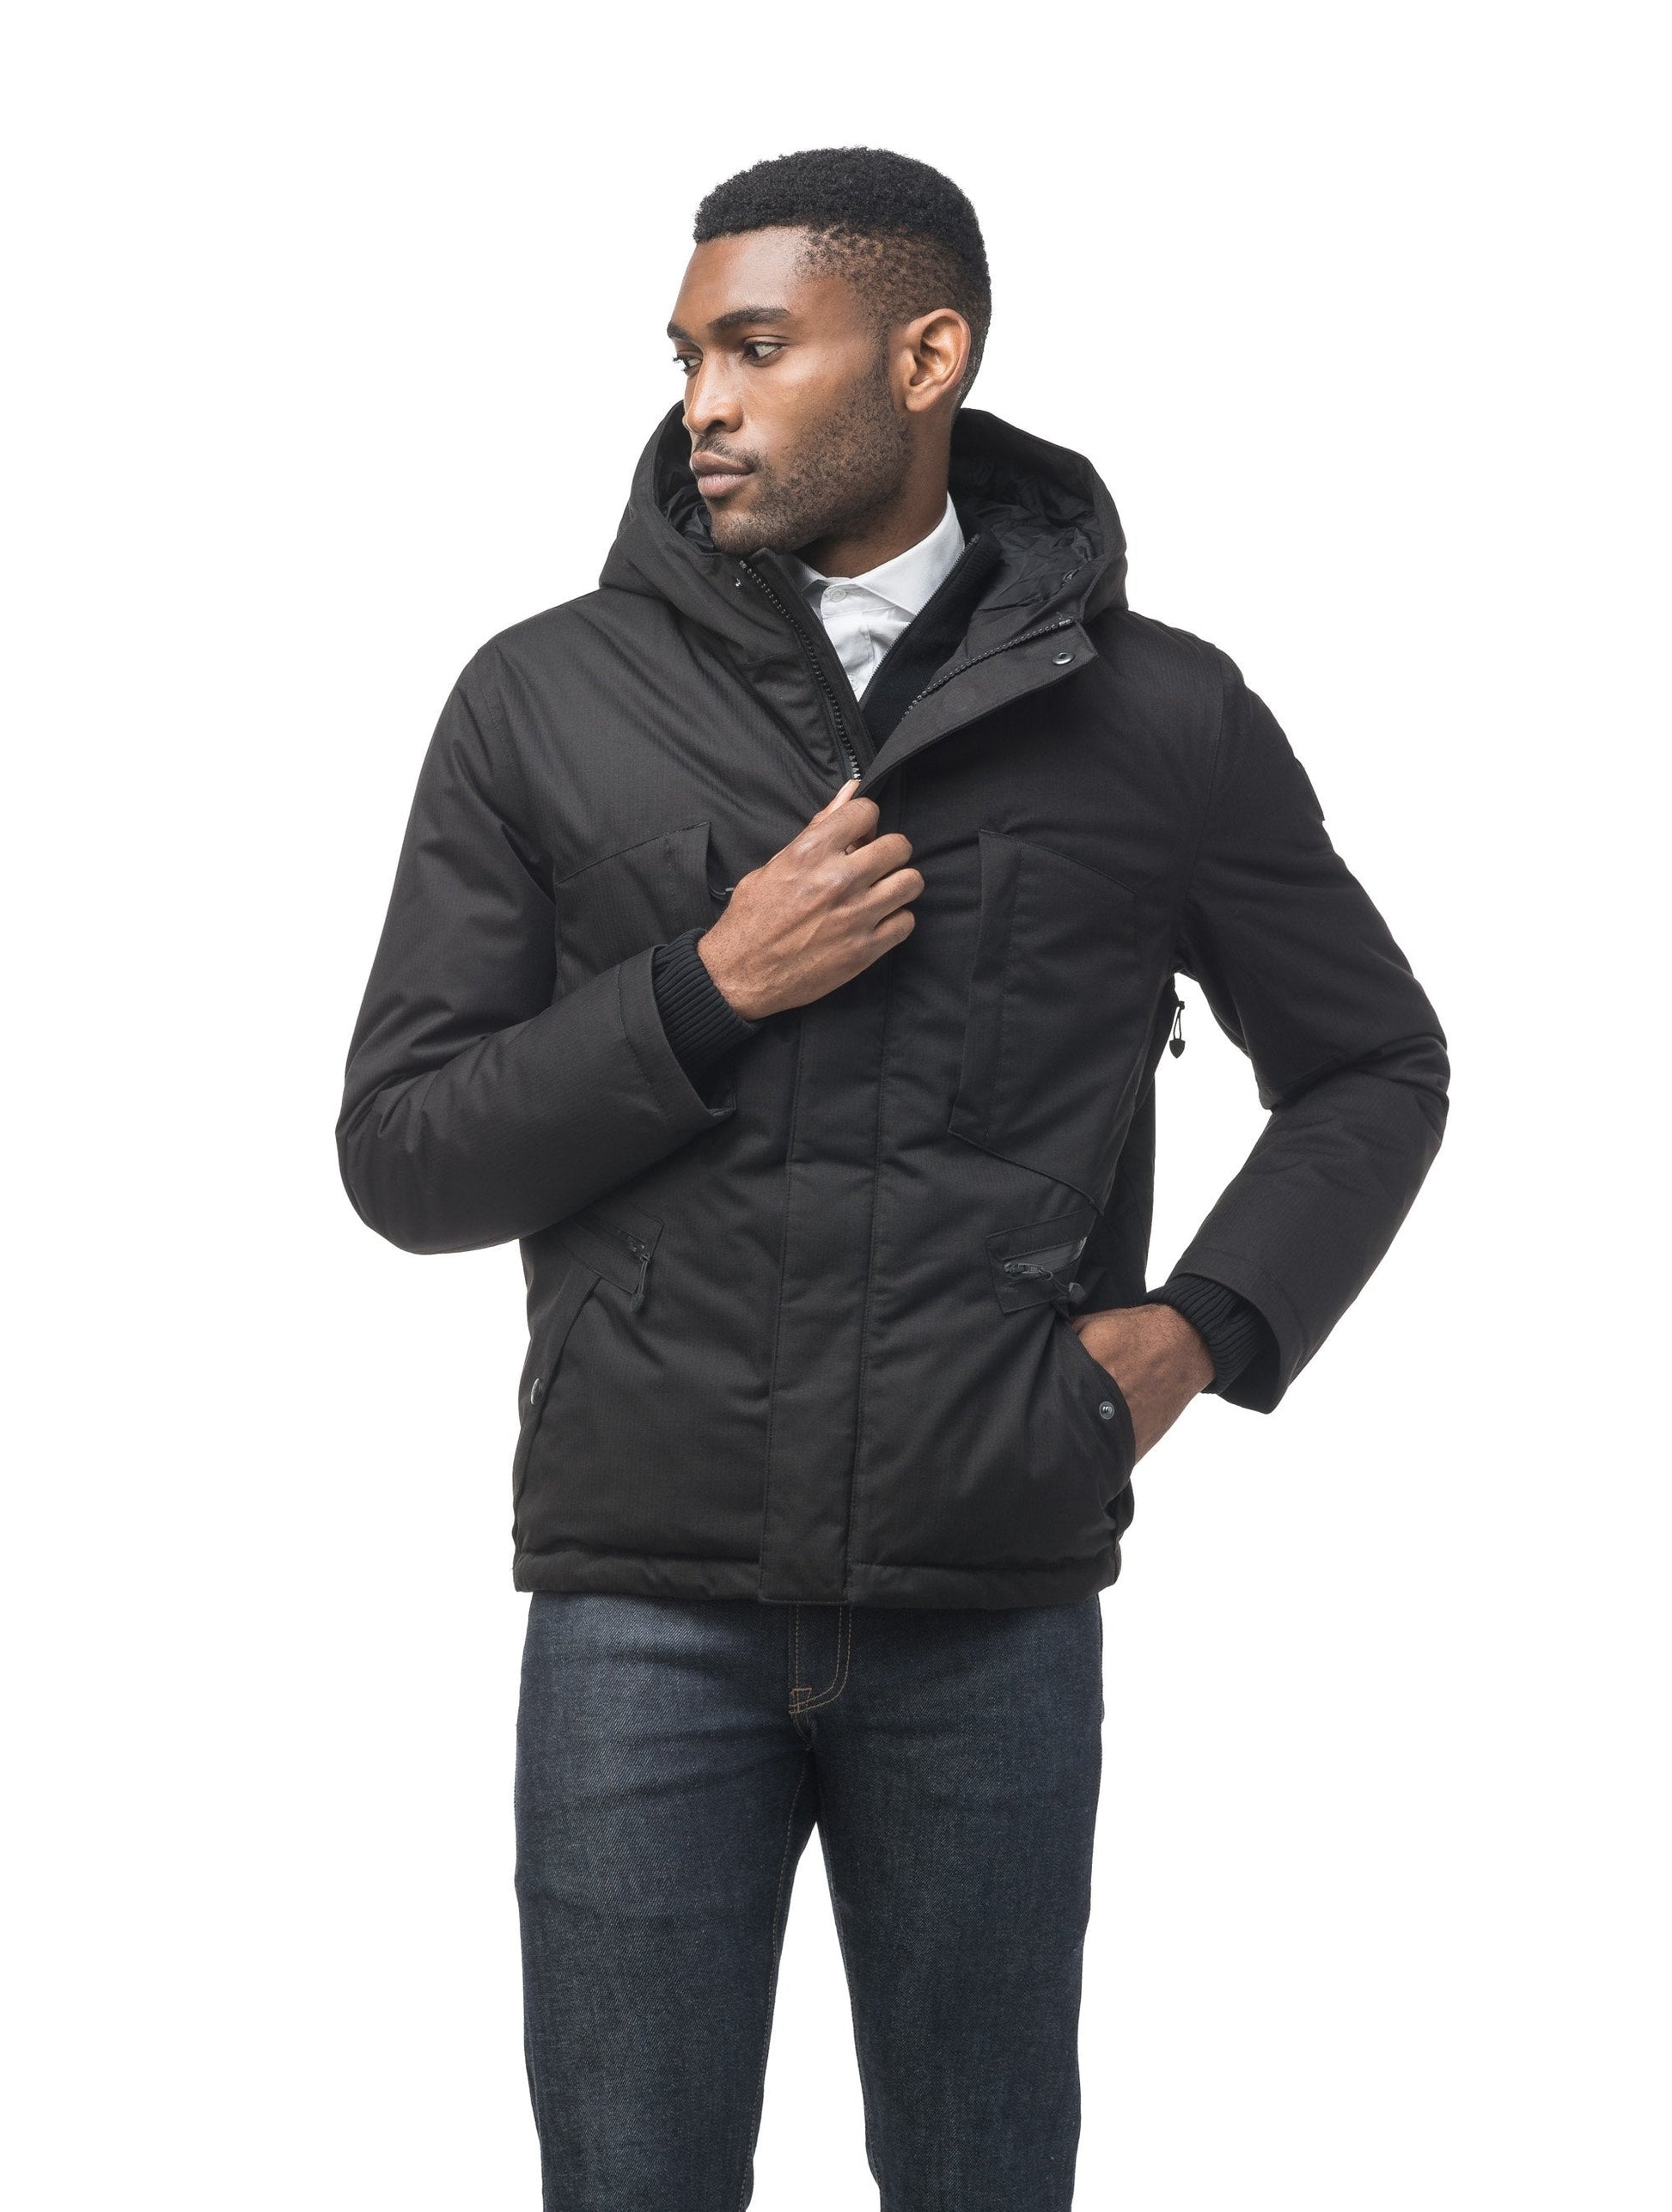 Men's waist length light down coat equipped with six exterior pockets and a hood in Black